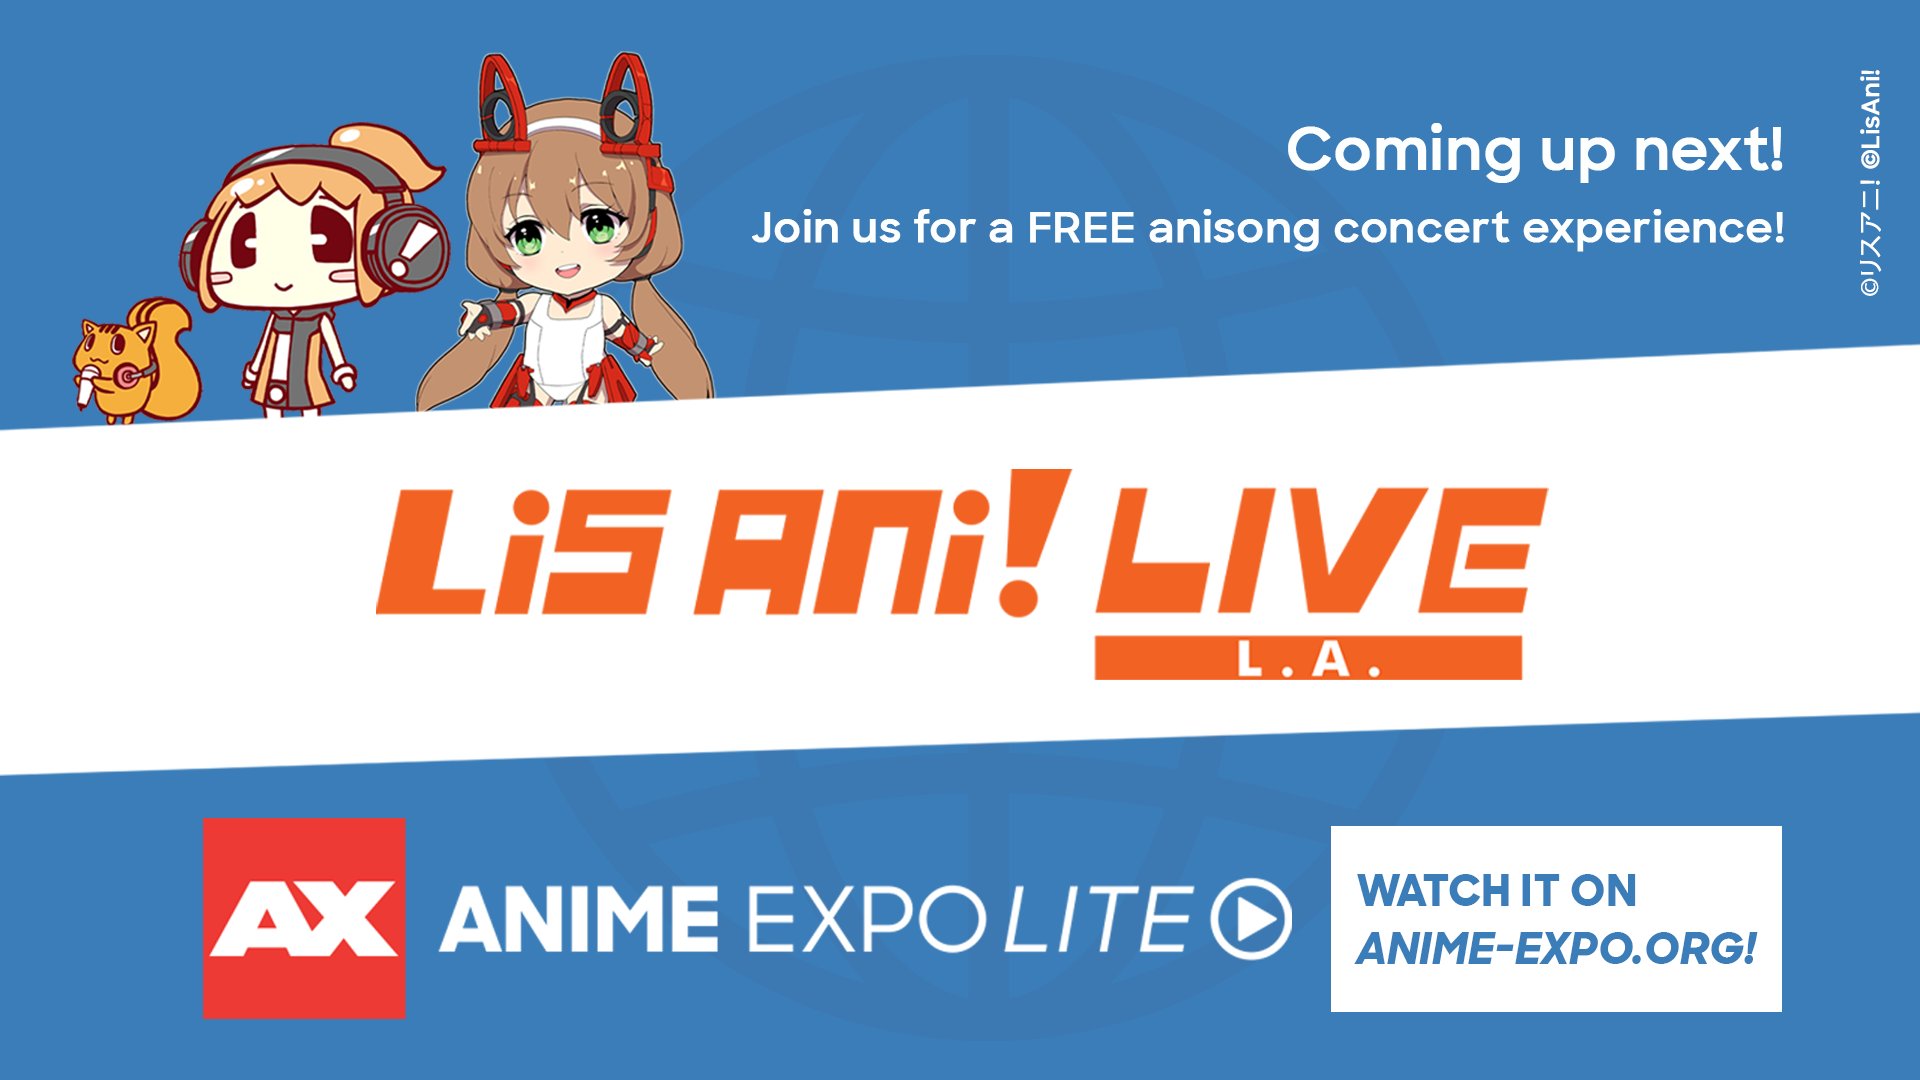 Anime Expo It S Time To Get Your Anisong On Anime Expo Lite X Lisani Live L A Is About To Start Head To Our Website To Watch It